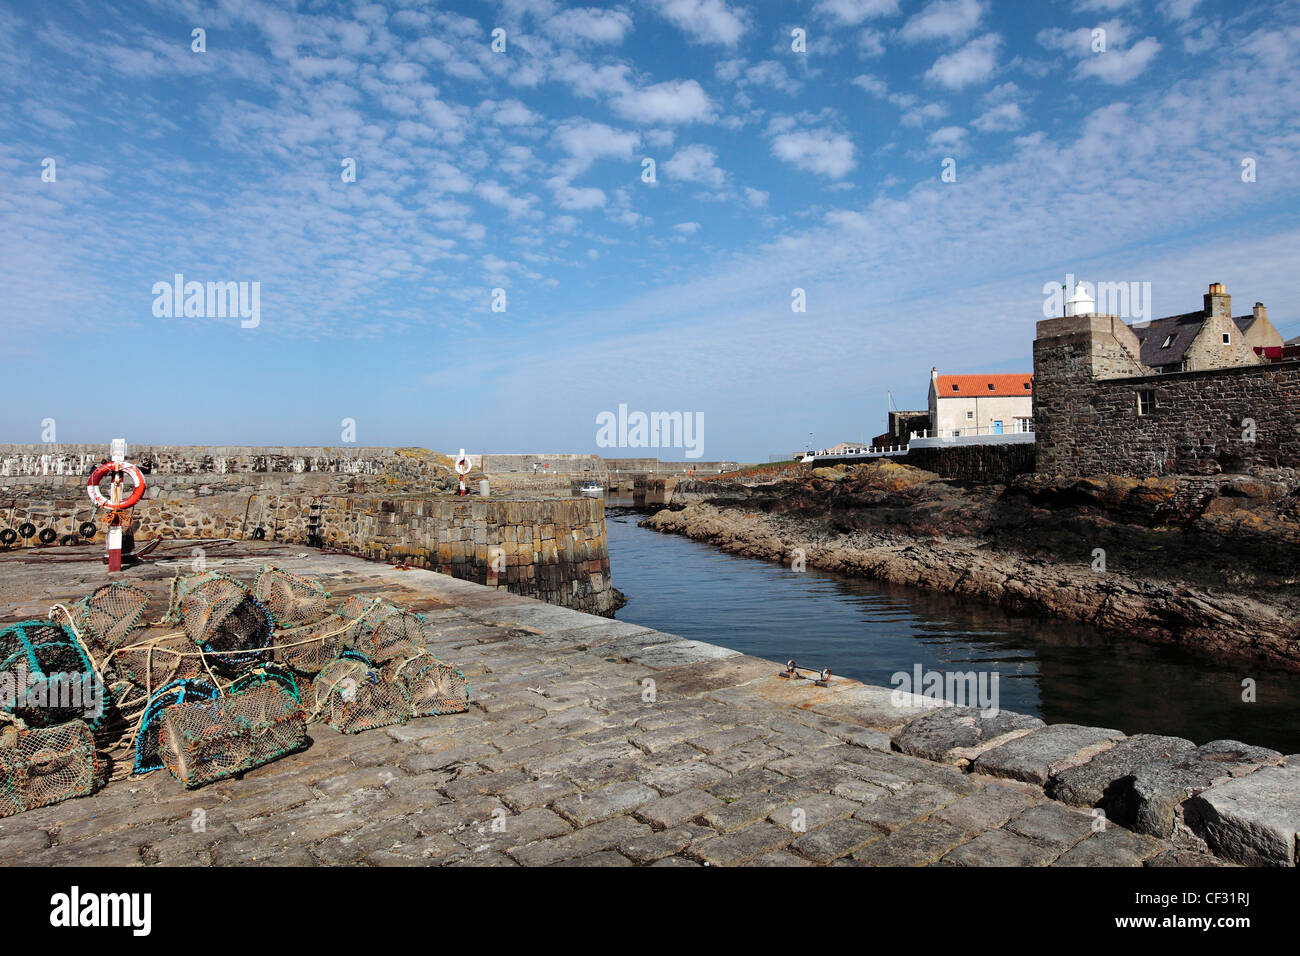 Portsoy Harbour, completed in 1693 is possibly the oldest natural harbour in Europe. Stock Photo